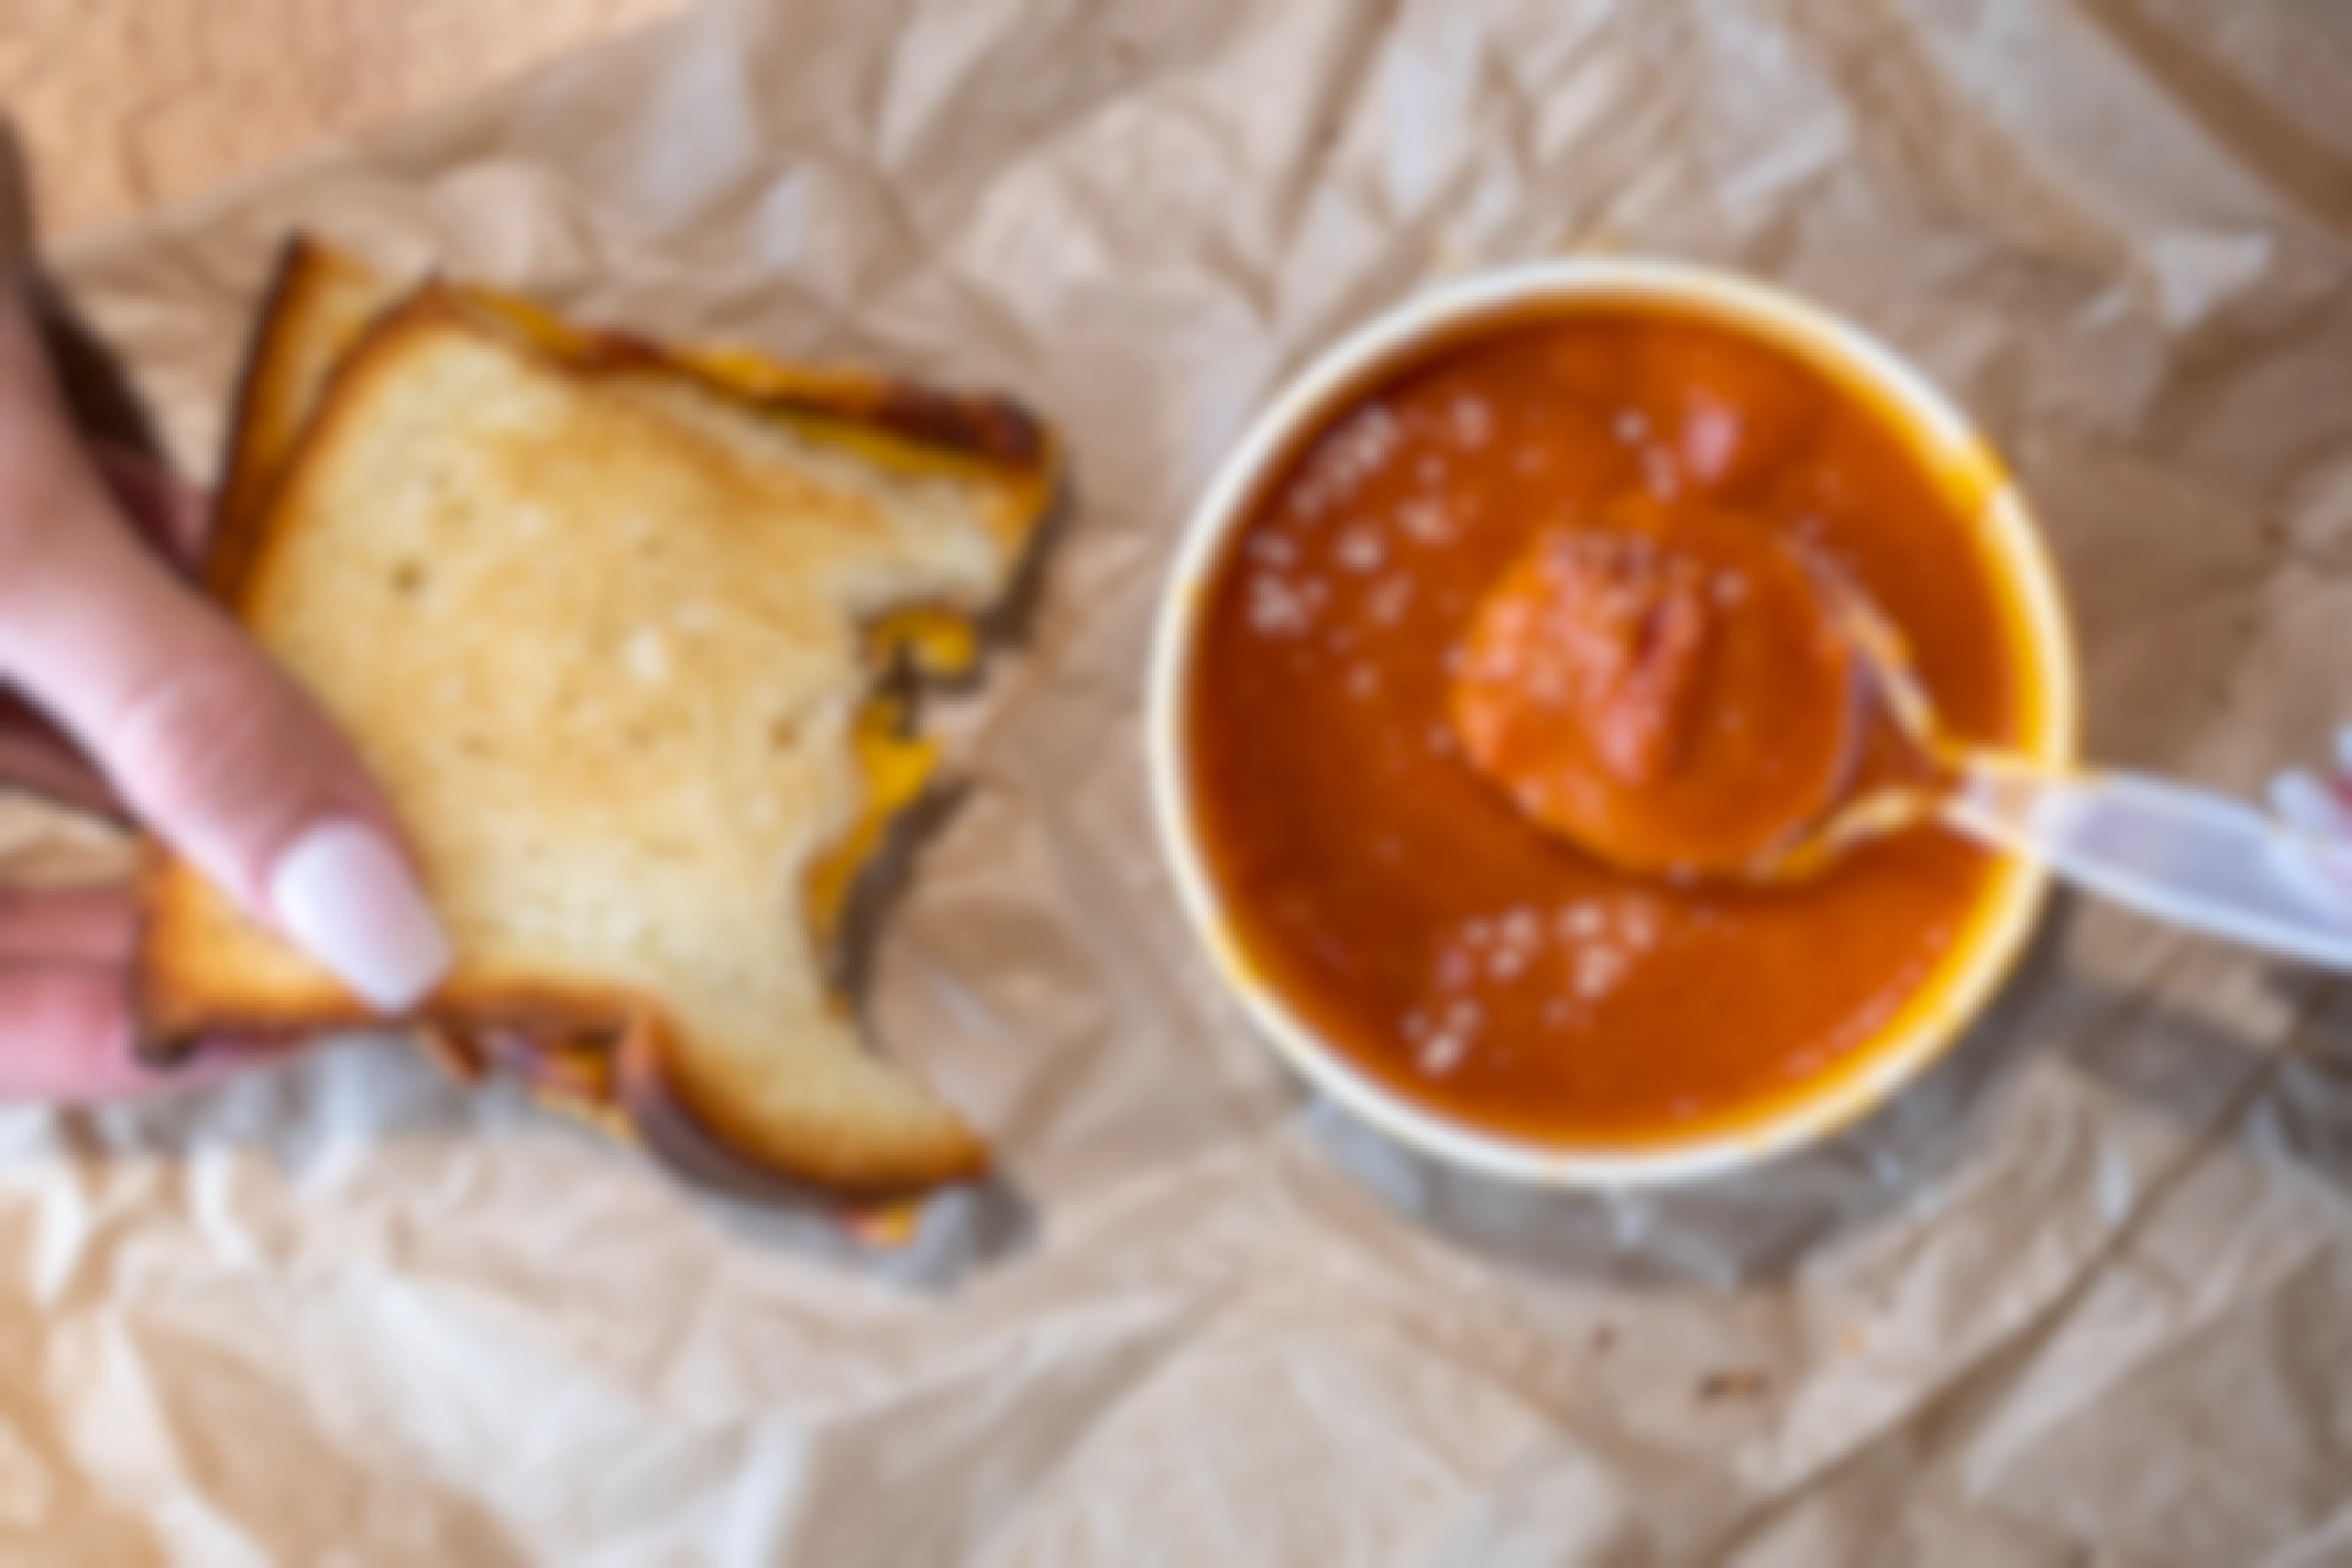 A grilled cheese sandwich and tomato soup